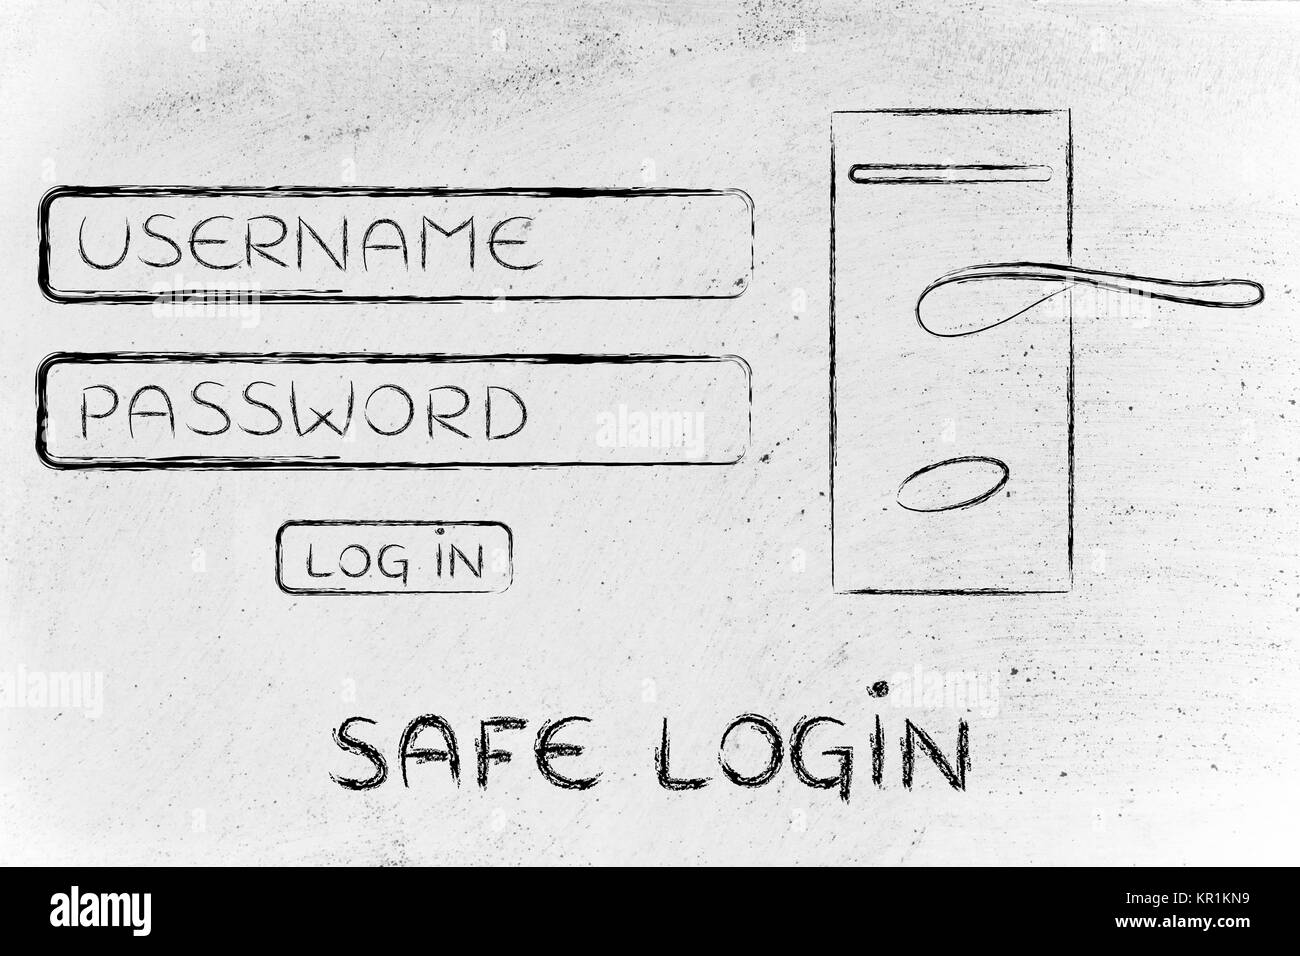 unsername and password dialog: safe login with door lock and handle Stock Photo